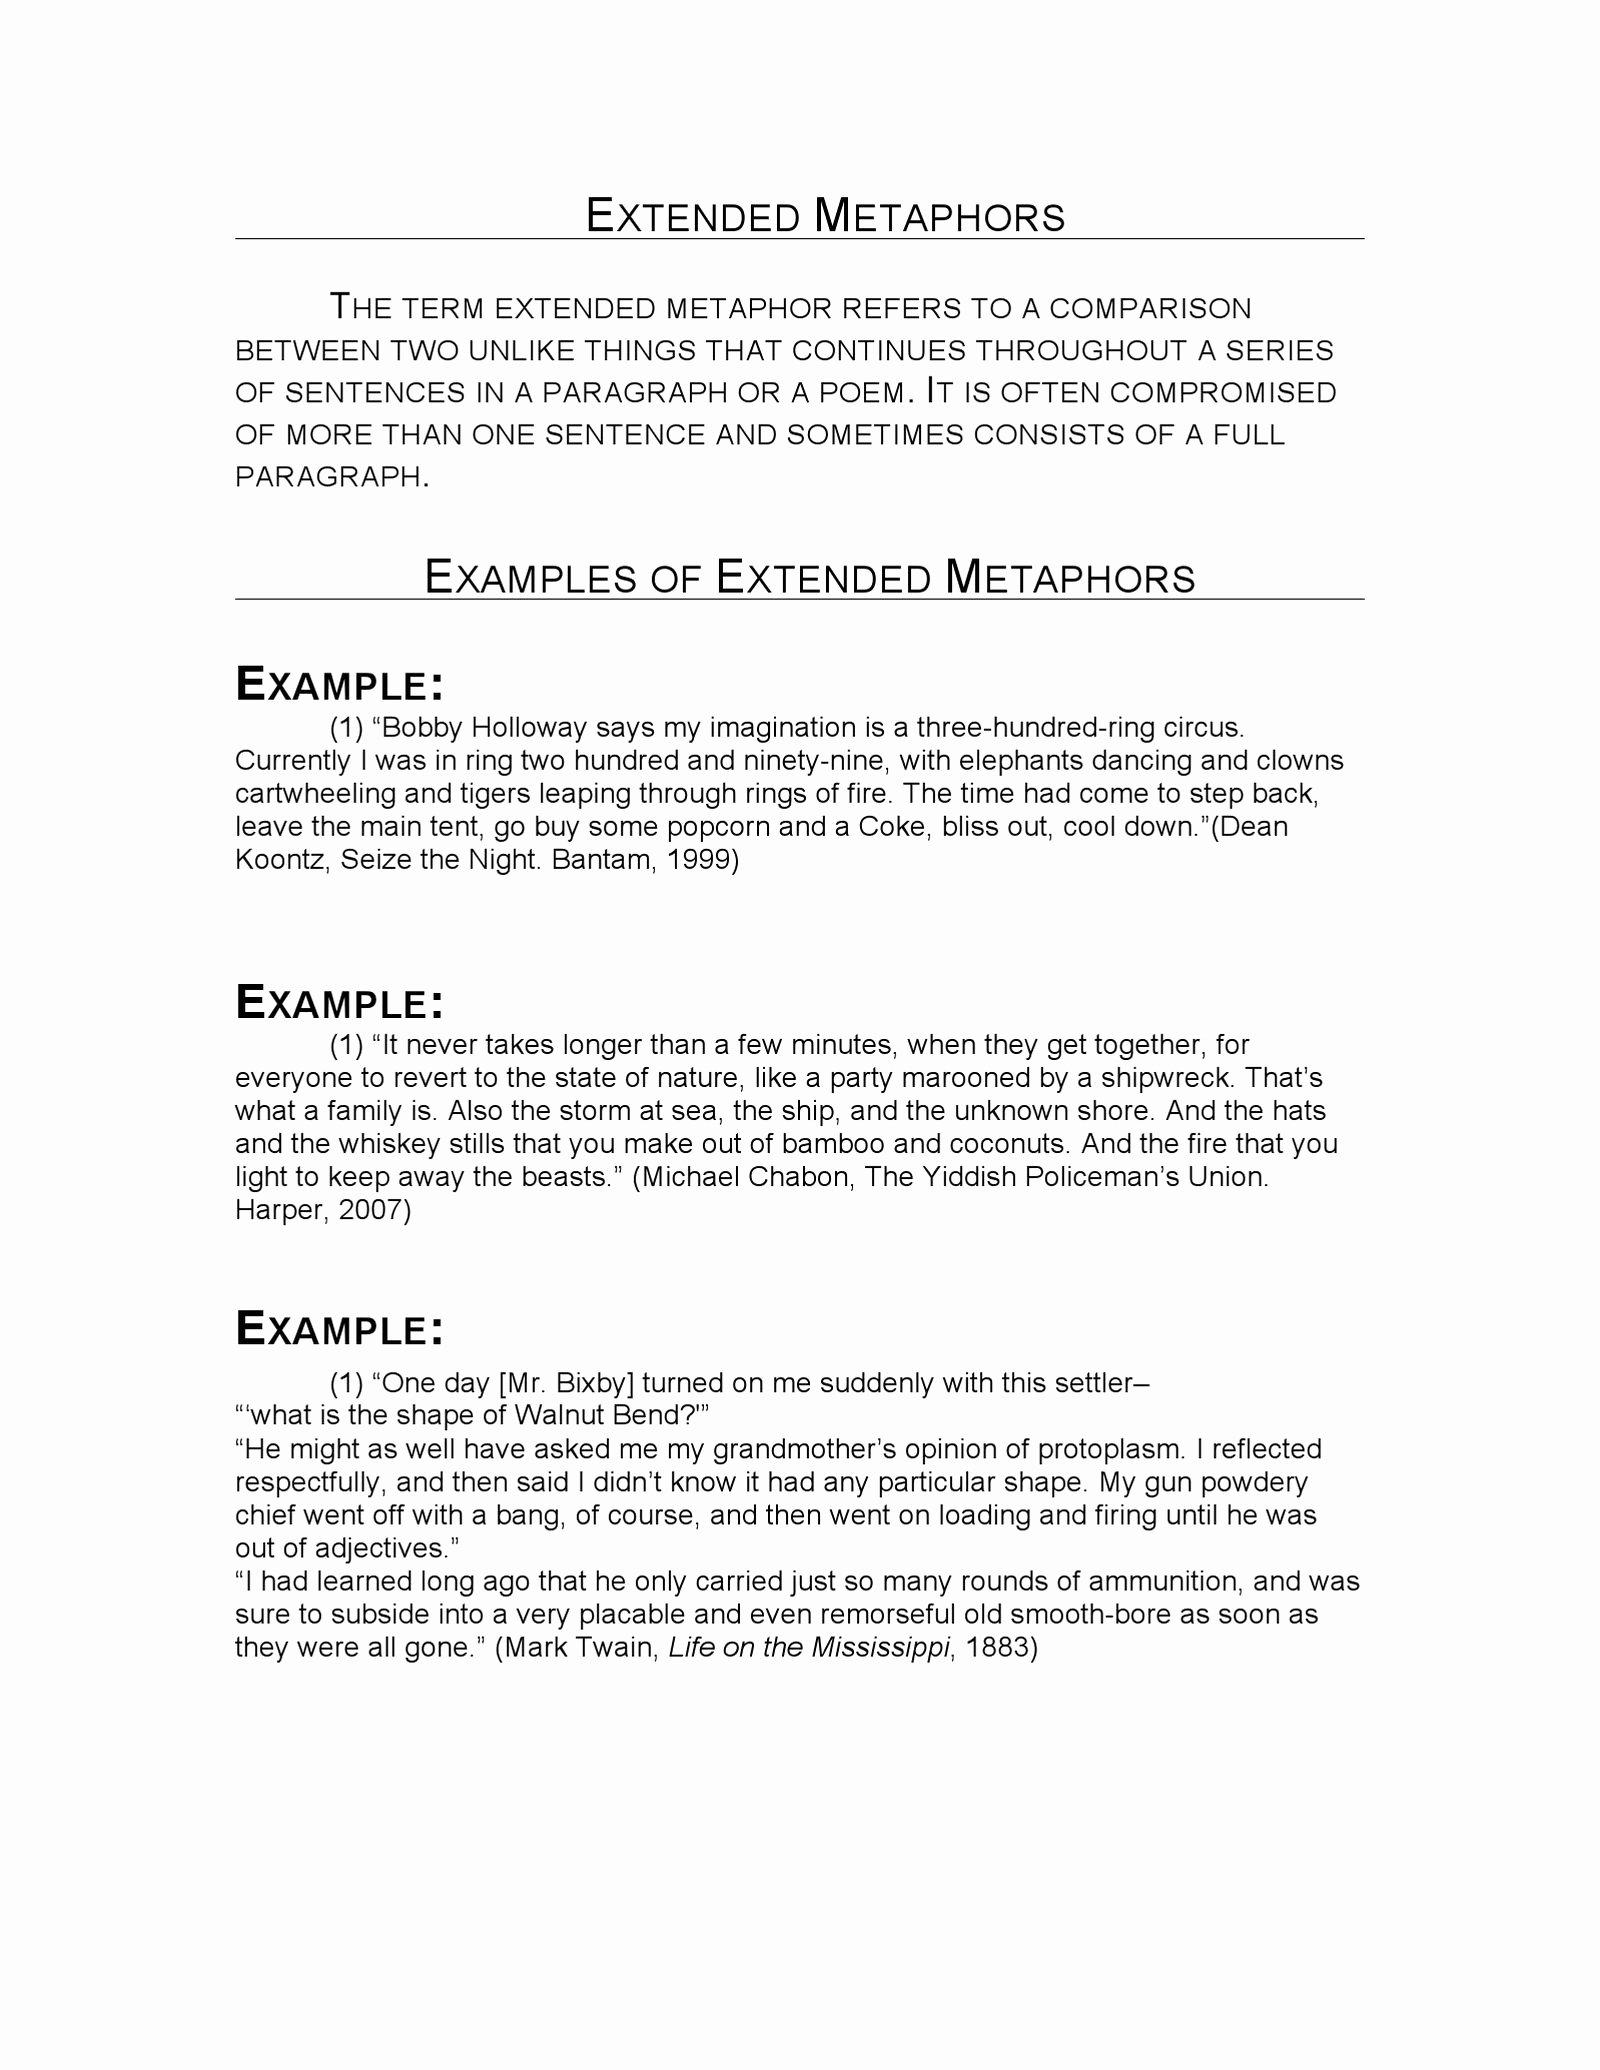 Wgu Lesson Plan Template Beautiful Examples Poems with Extended Metaphors Wallpaperall